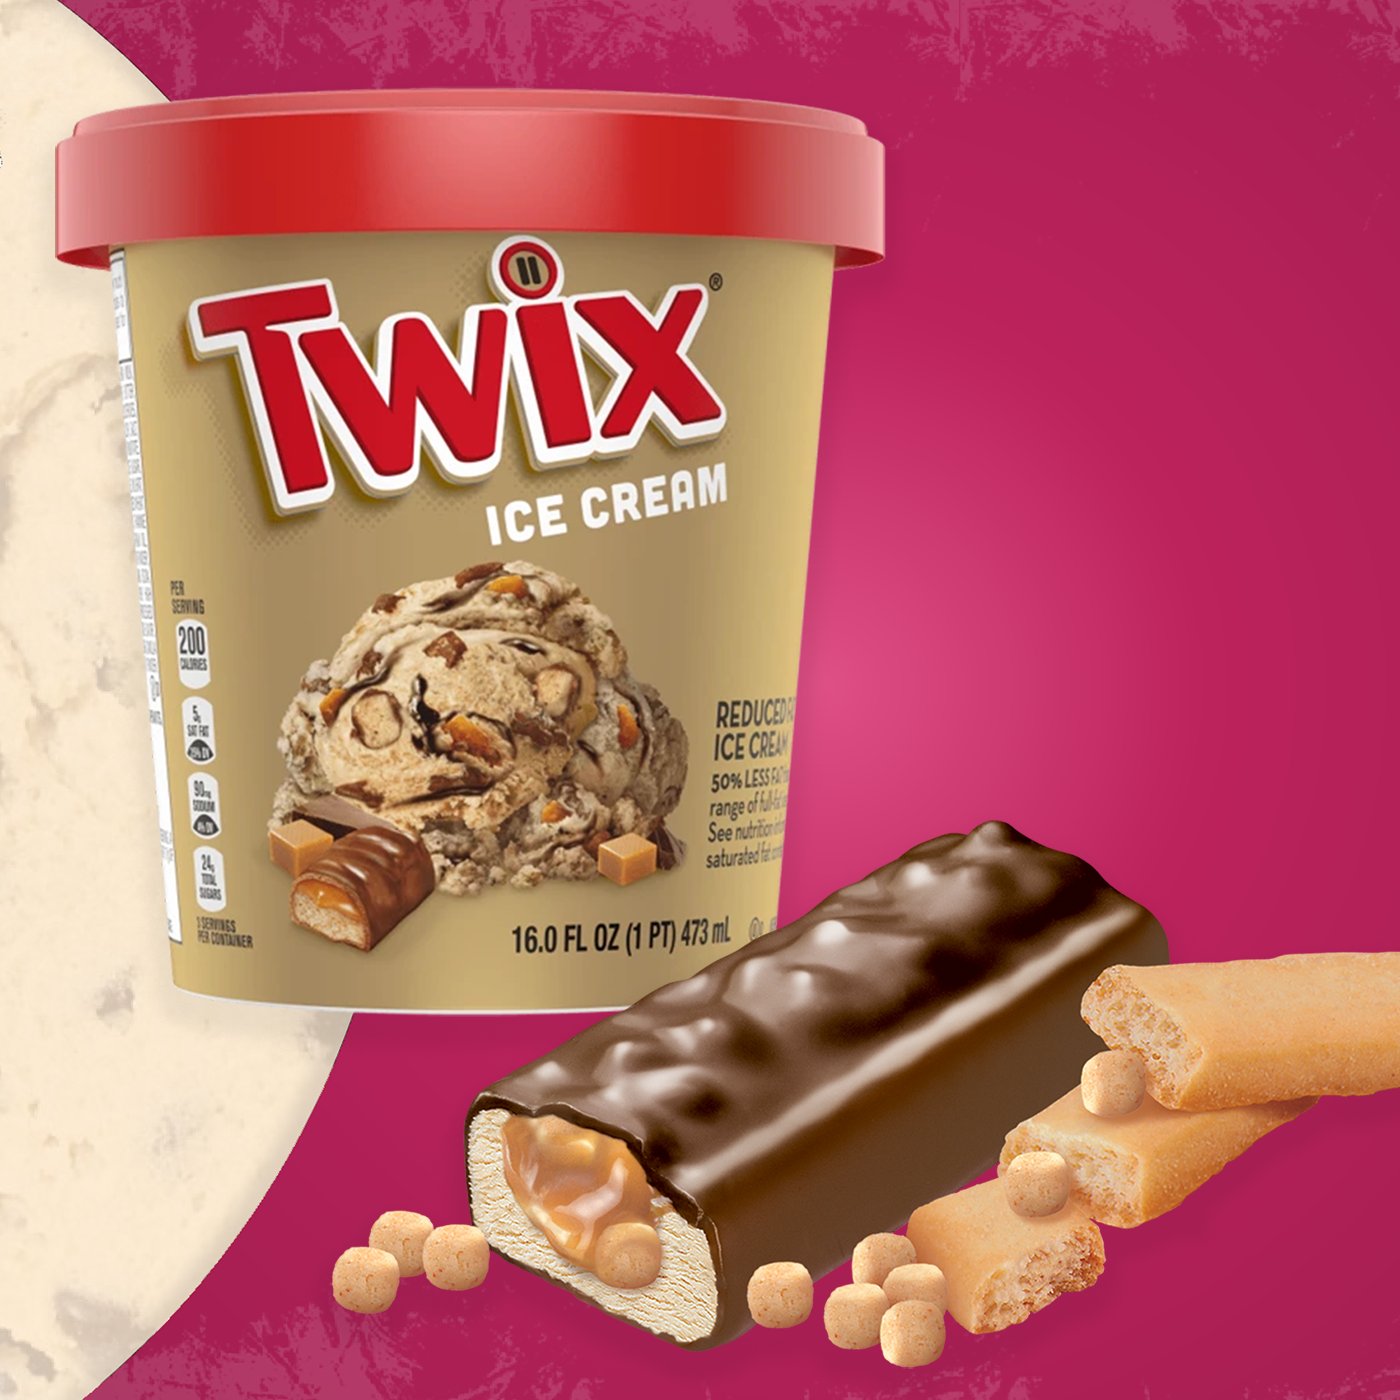 twix ice cream pint and ice cream bar from wholesale distributor transcold distribution